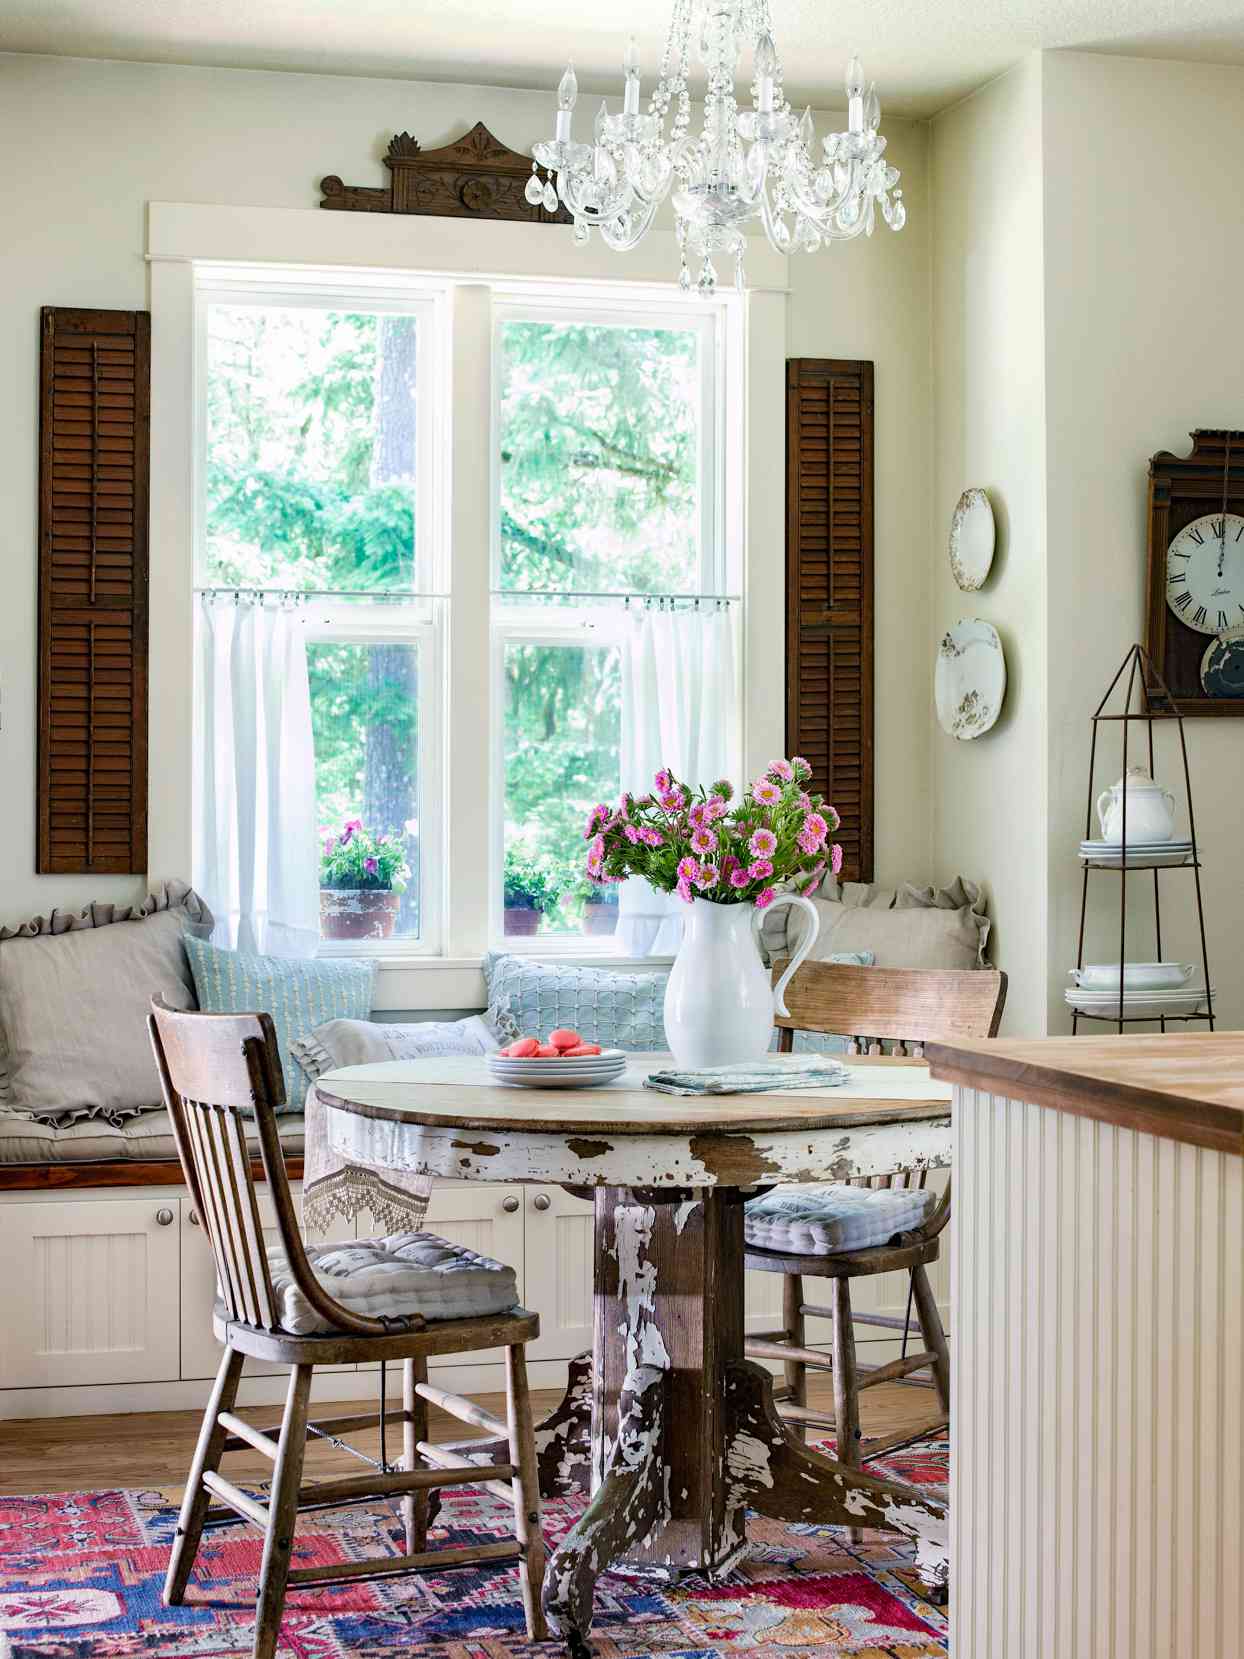 Charming French Country Decorating Ideas For Every Room Better Homes Gardens